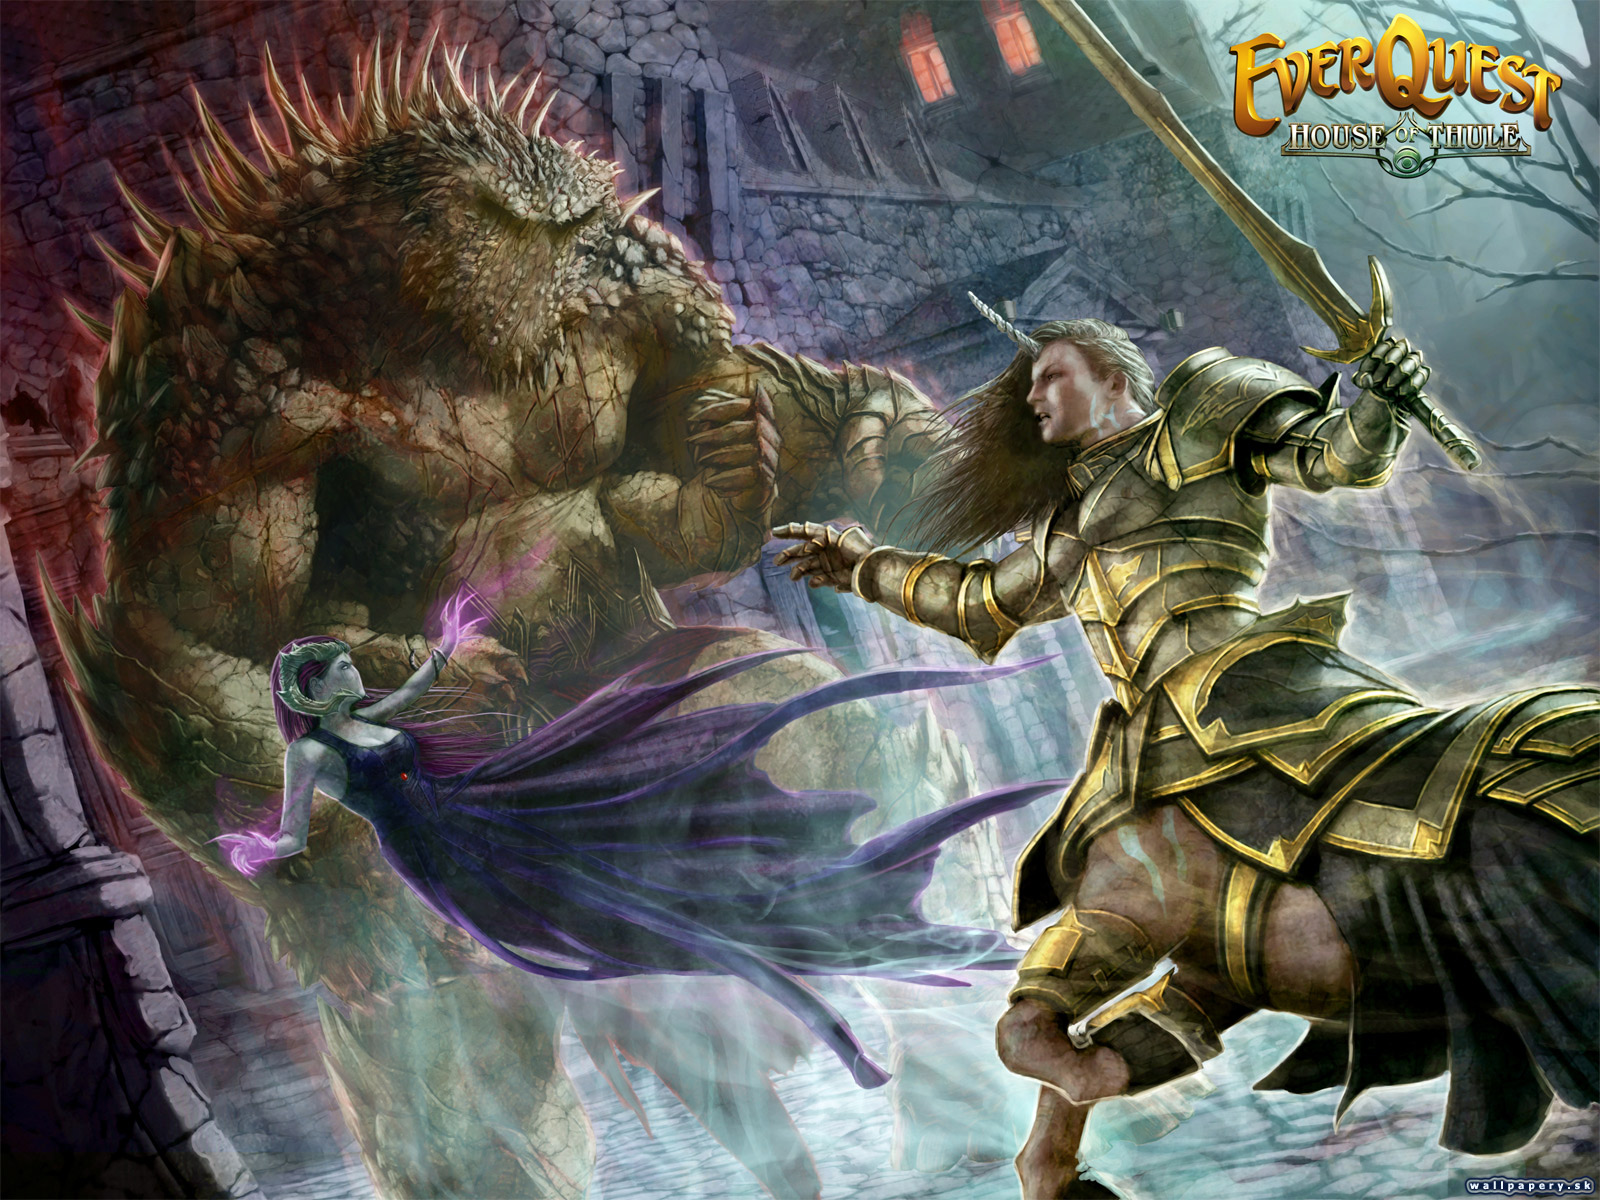 EverQuest: House of Thule - wallpaper 1.